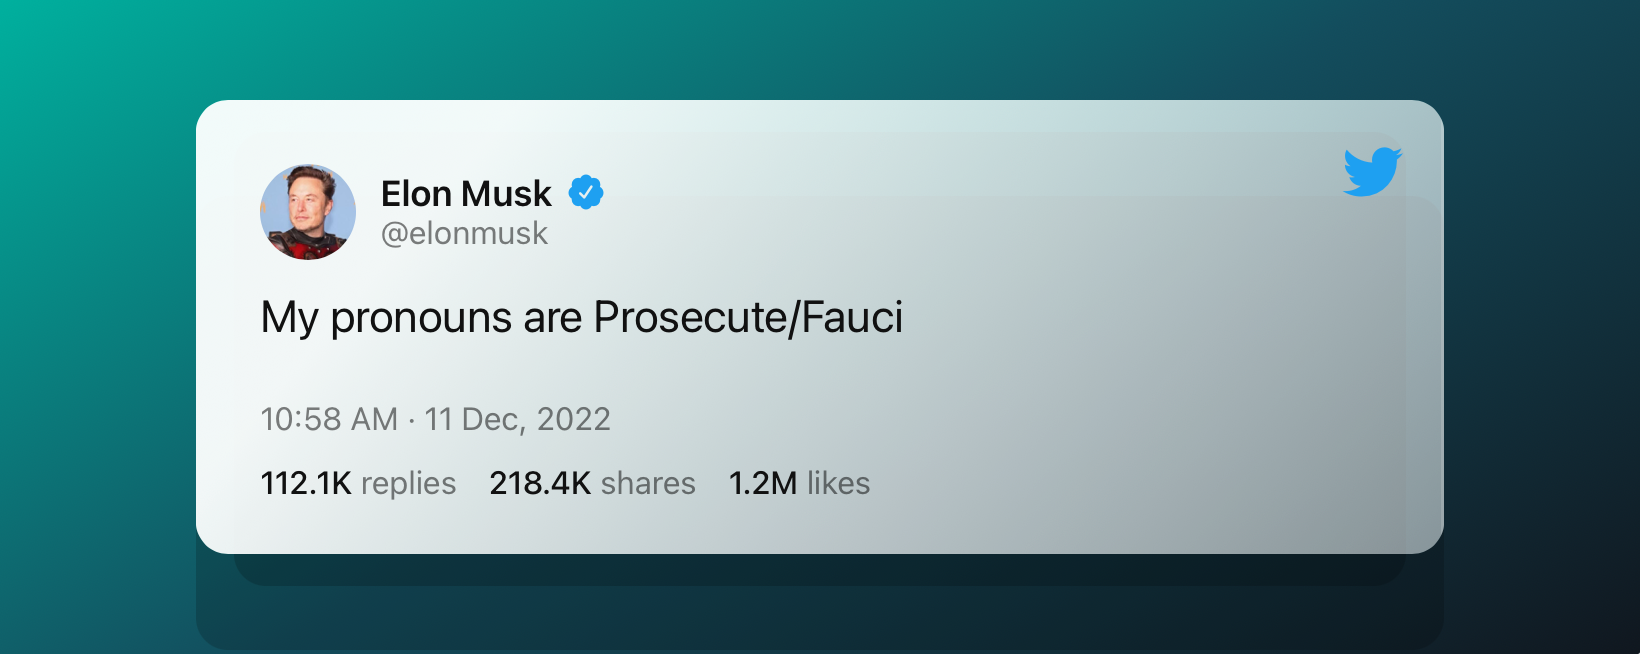 A tweet from Elon Musk saying “My pronouns are Prosecute/Fauci"